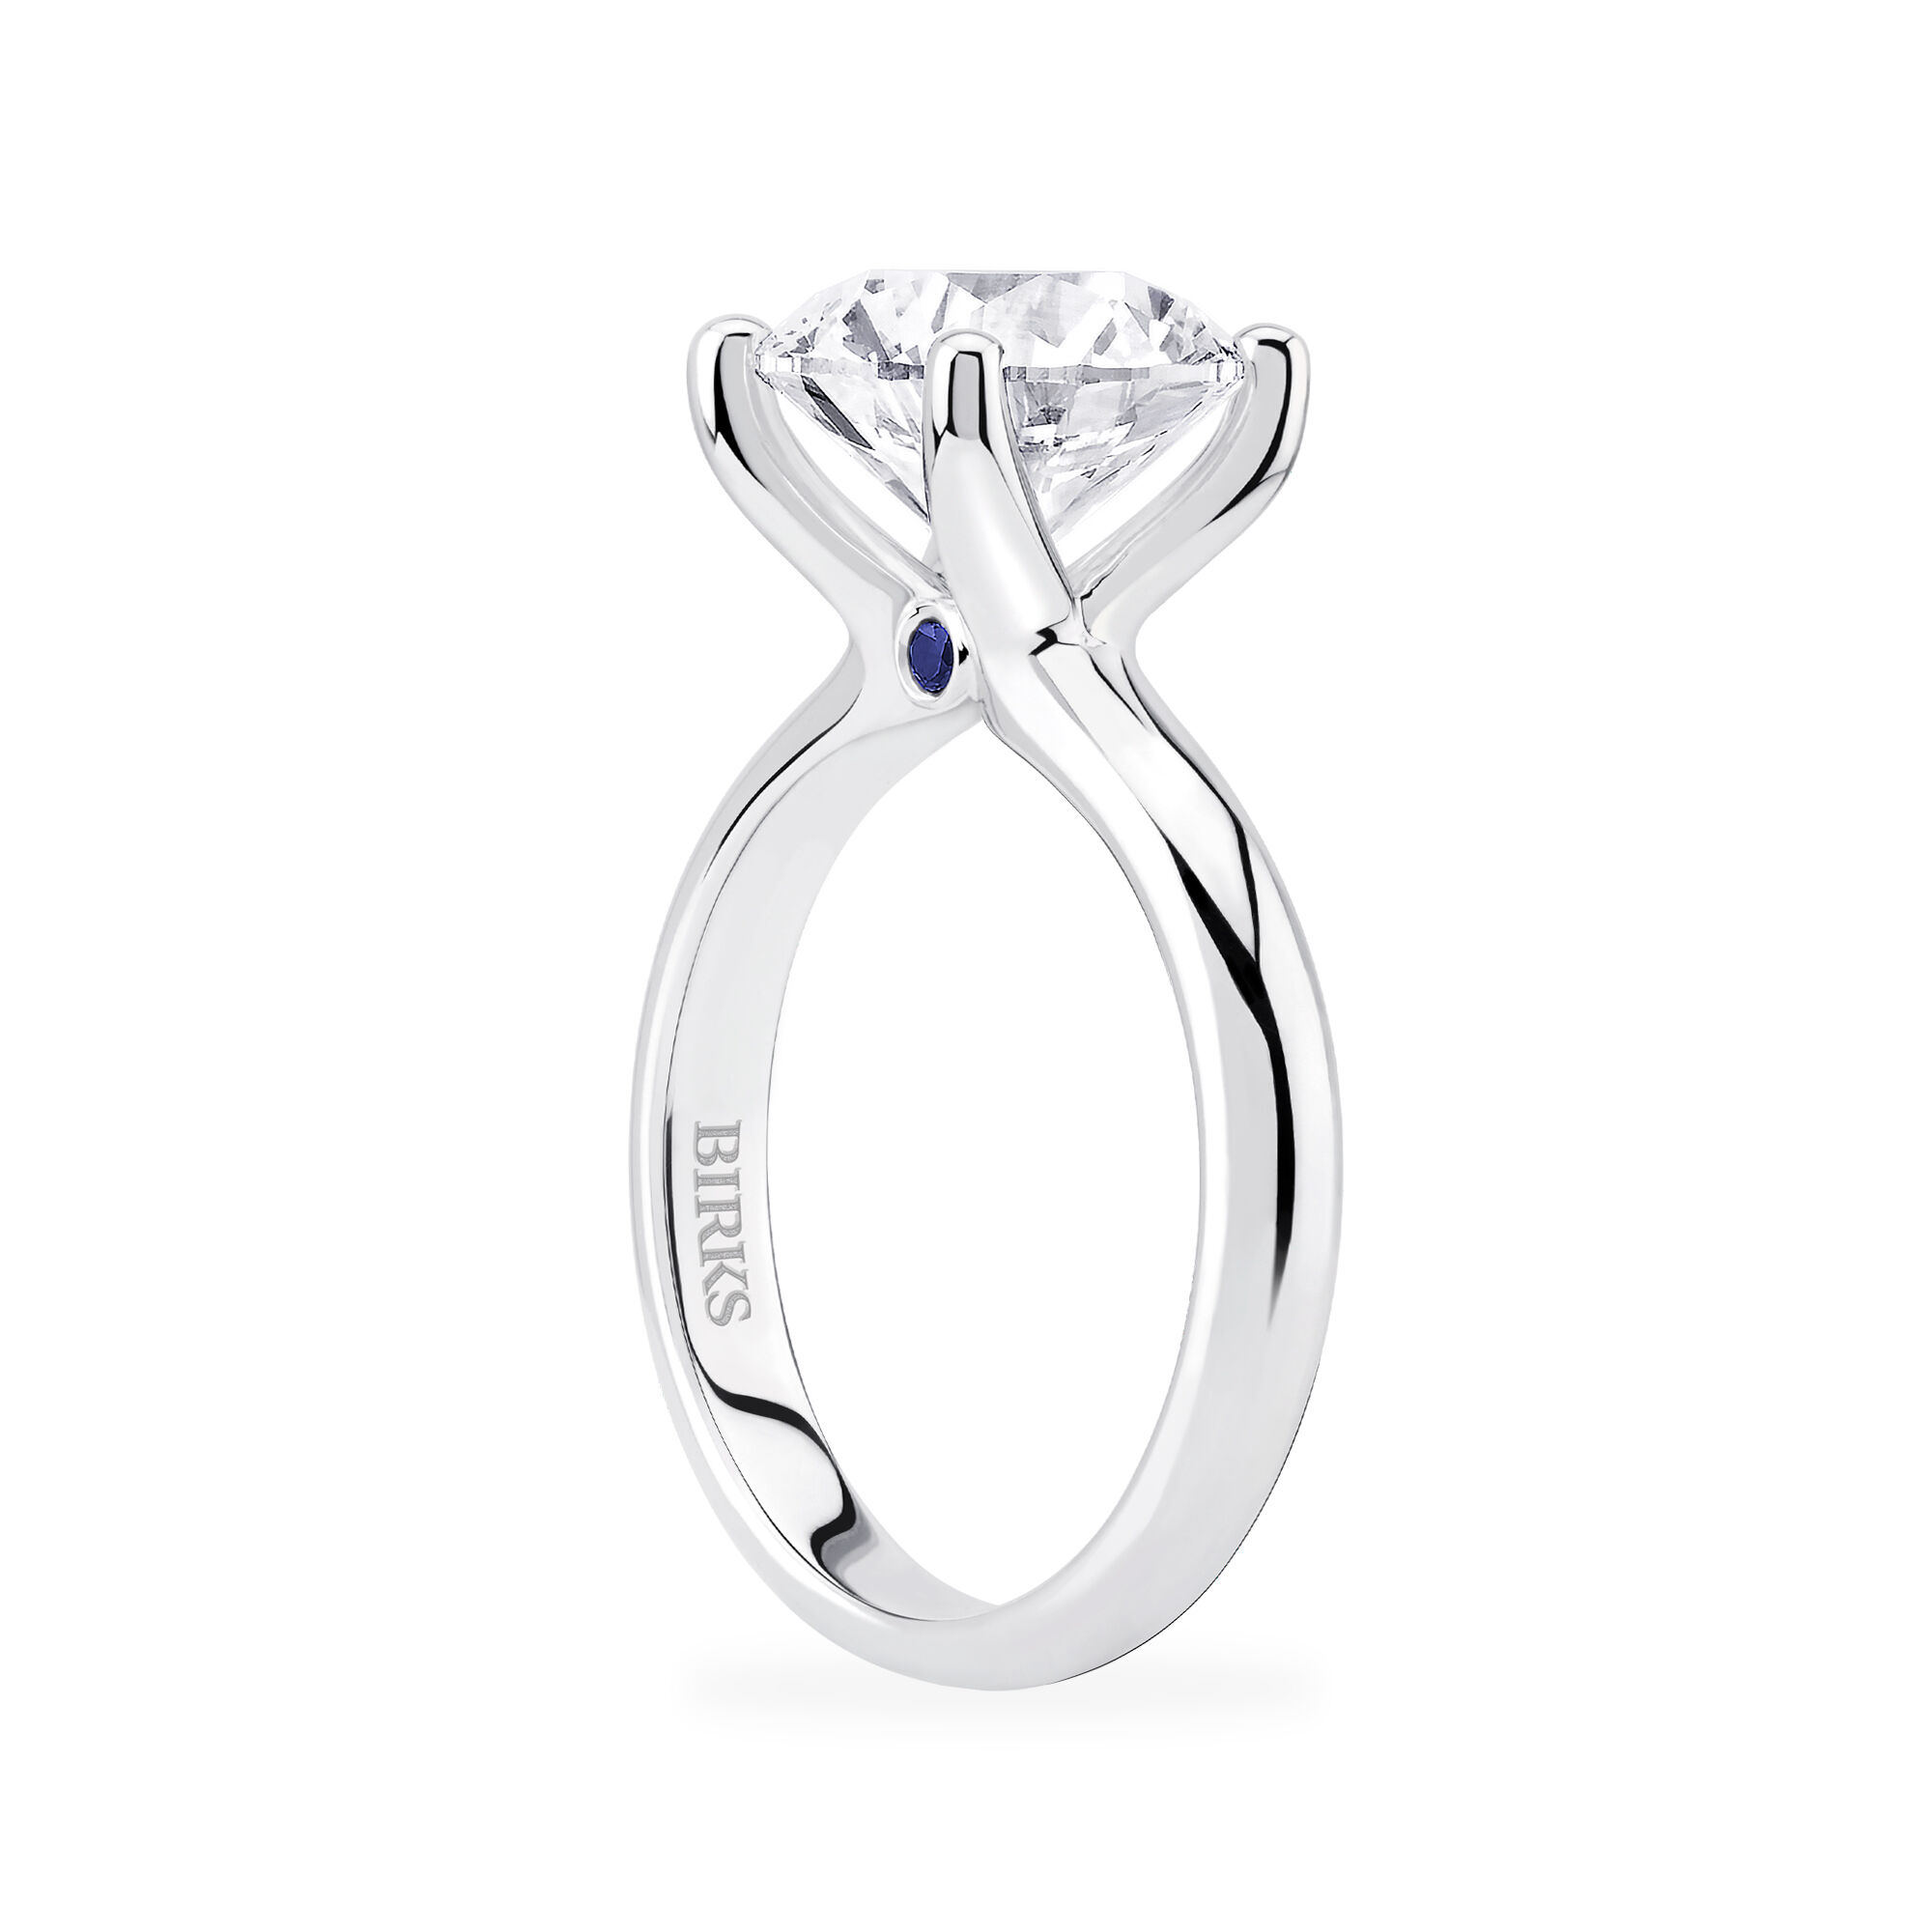 Diamond Solitaire Engagement Ring with Sapphire | Birks Blue